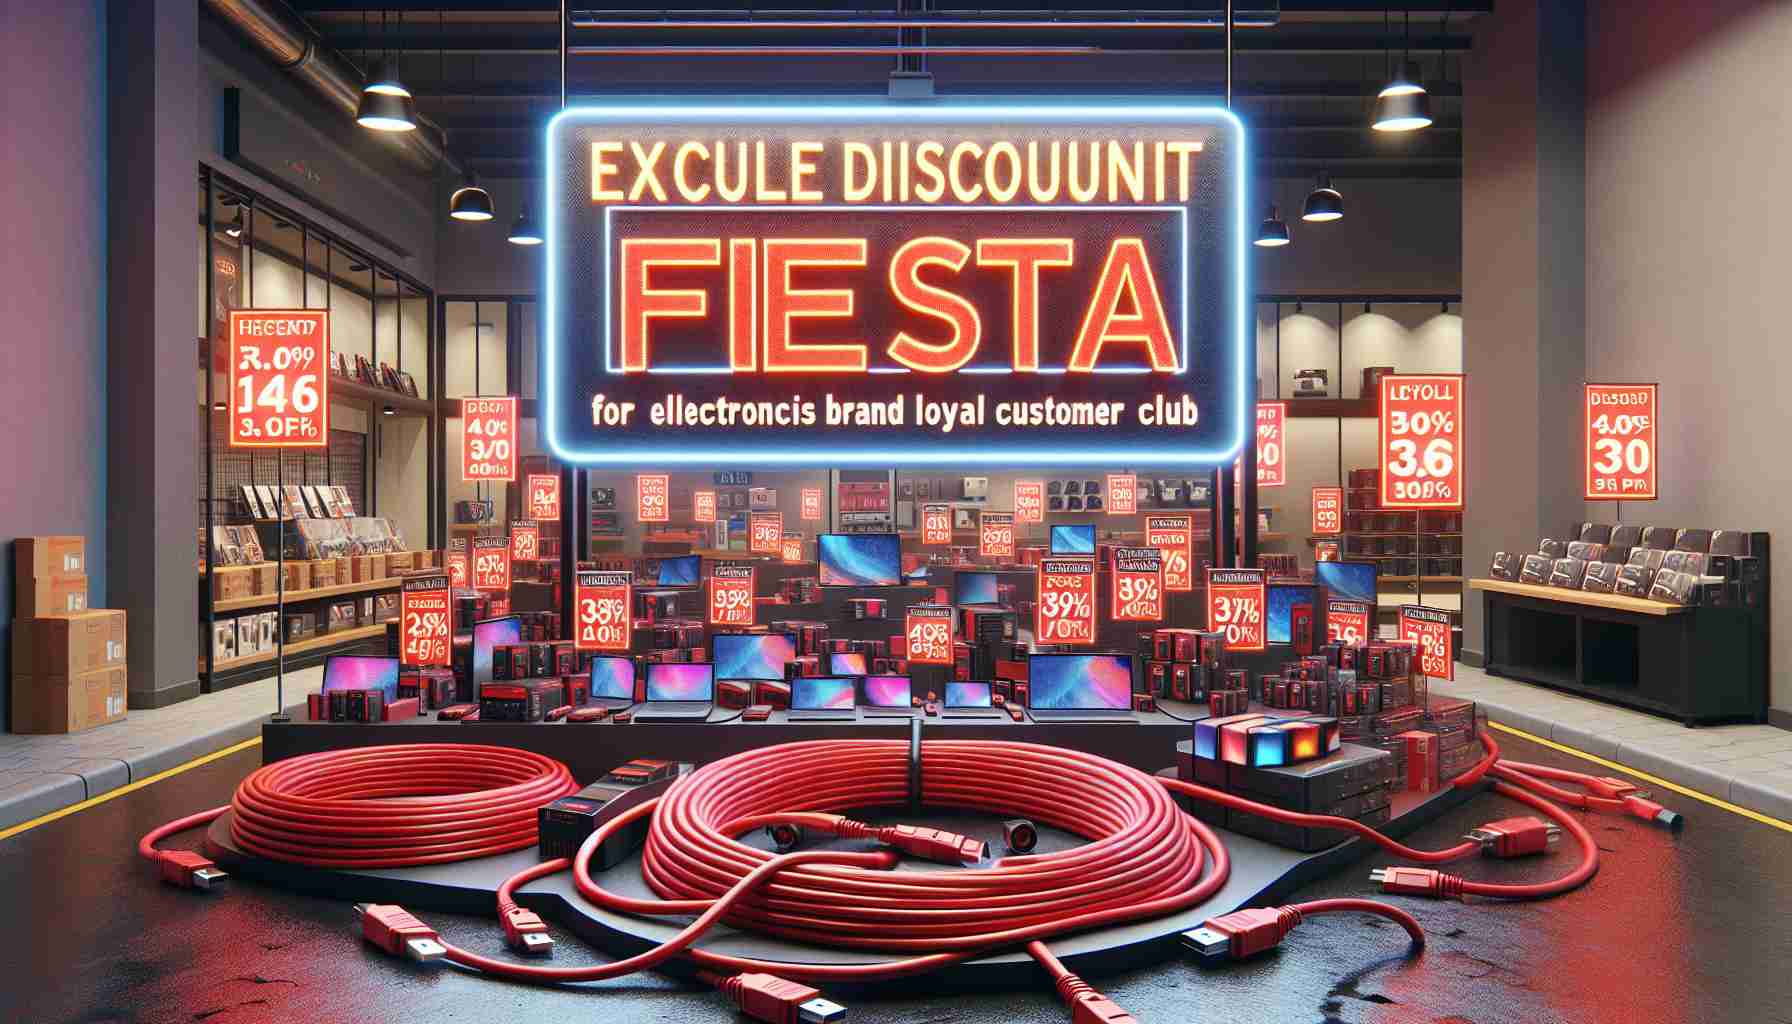 OnePlus Red Cable Club Unveils Exclusive Discount Fiesta for Members